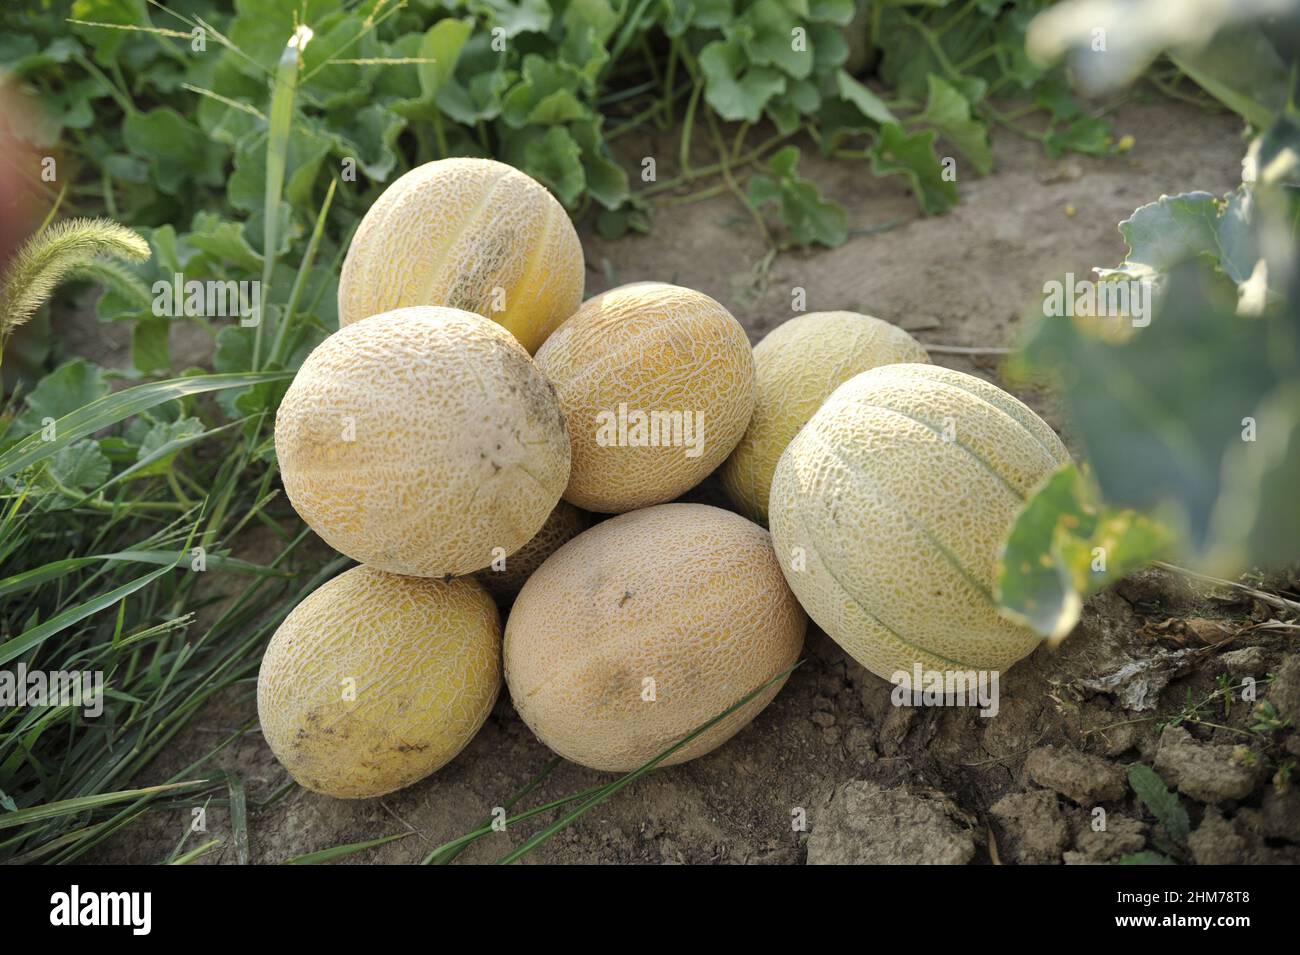 Close-up shot of freshly picked ripe cantaloupes in a garden Stock Photo